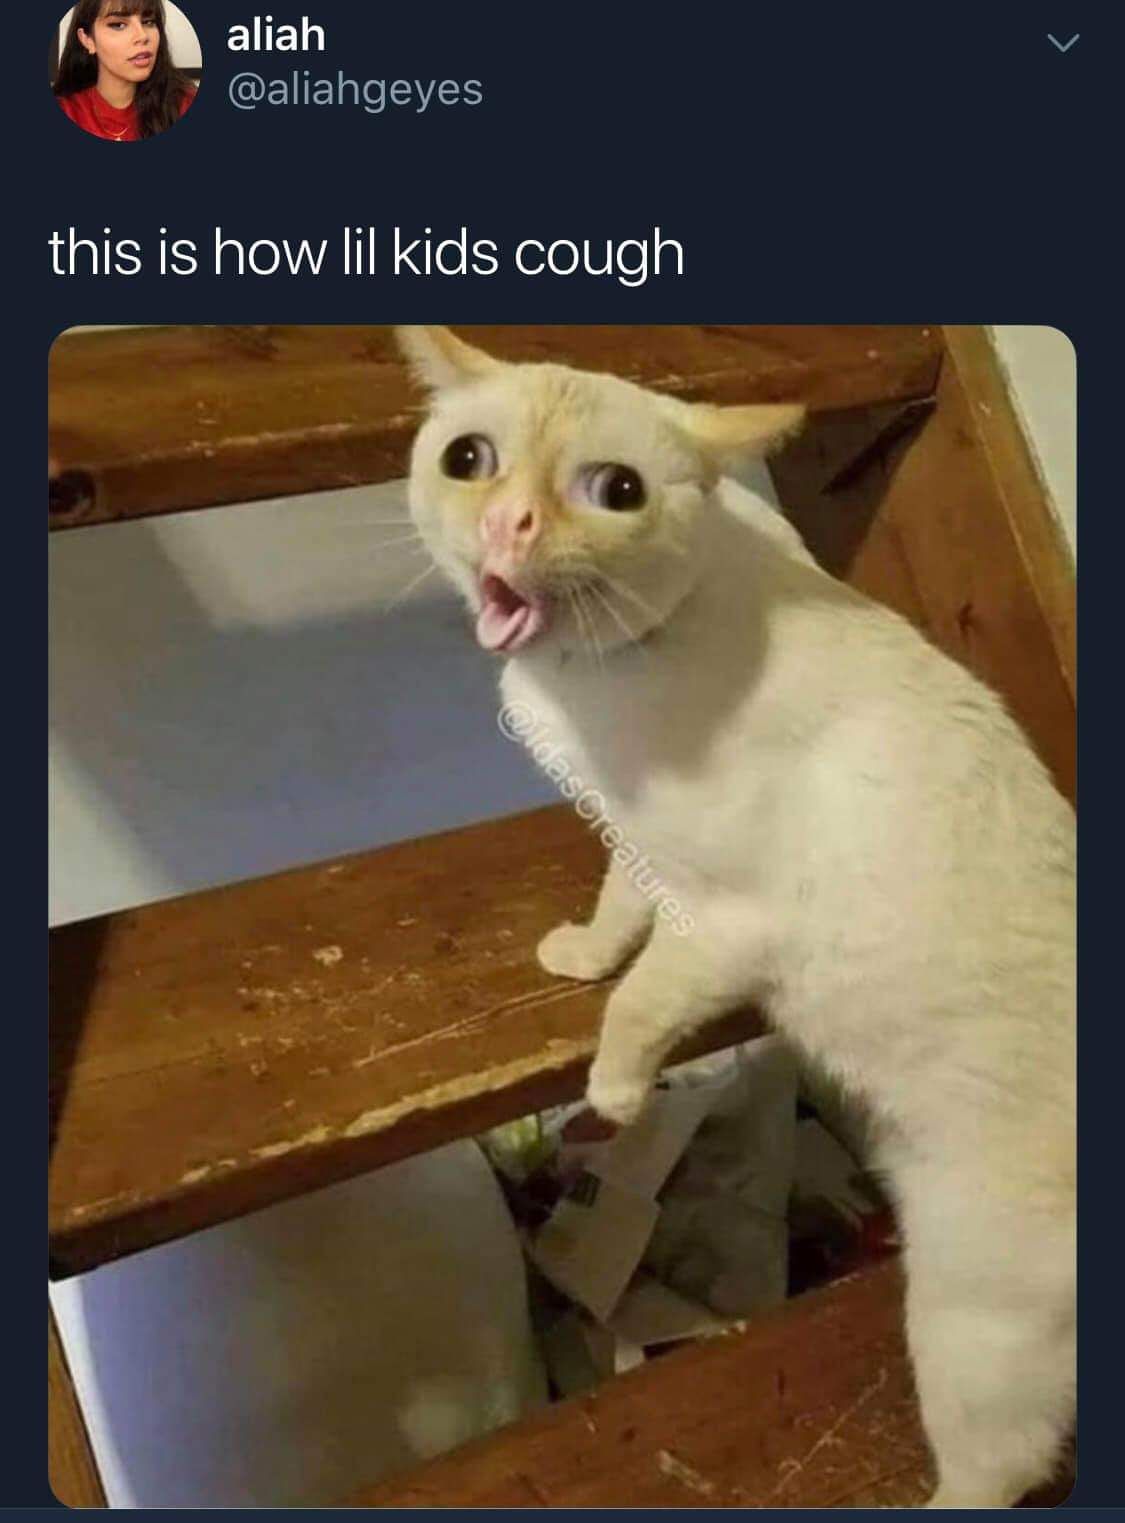 this is how lil kids cough.